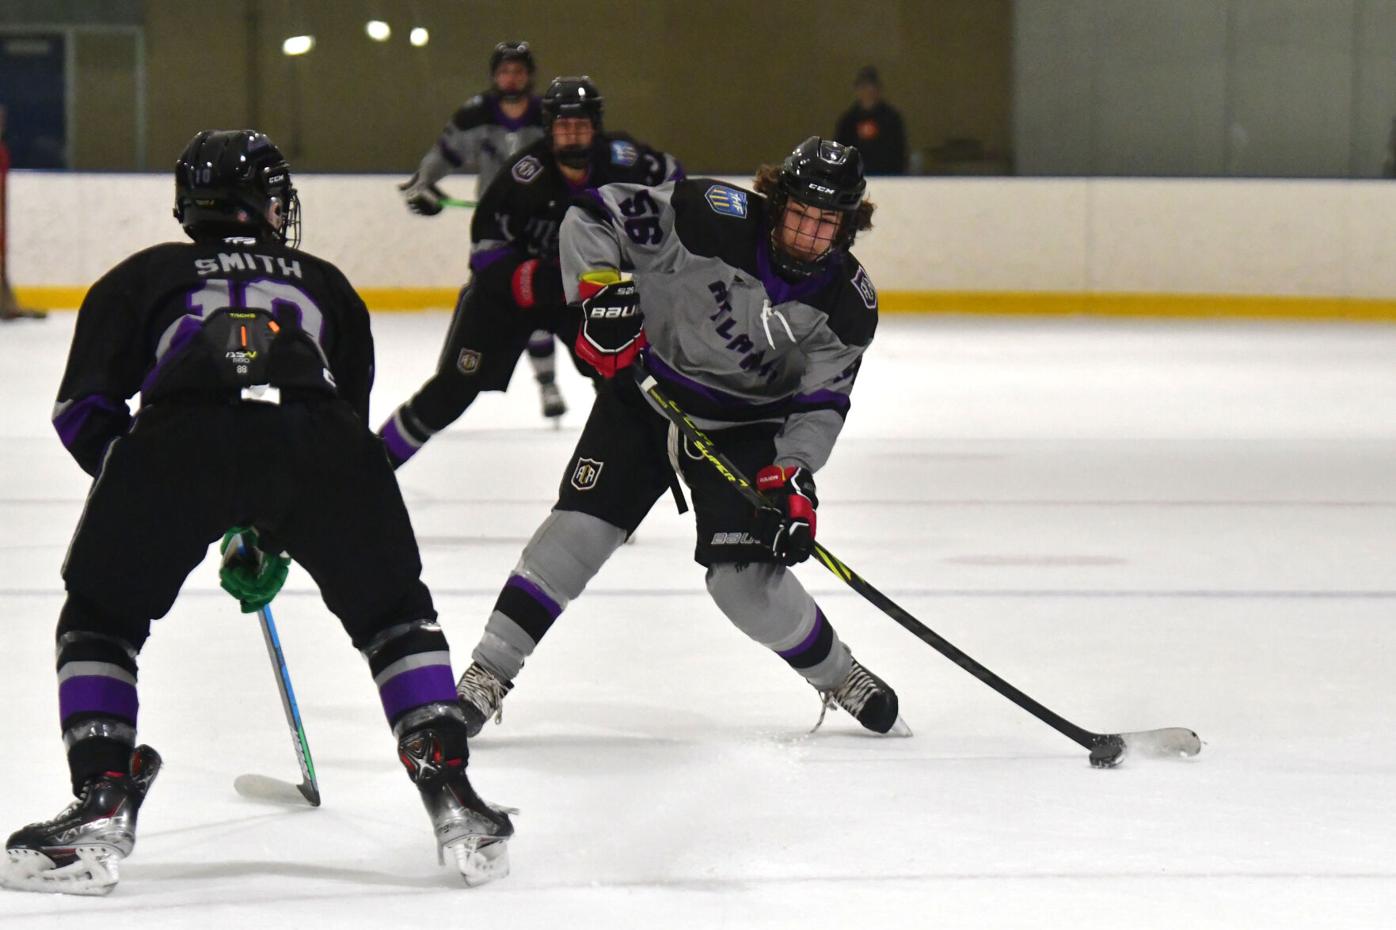 Junior hockey comes to Berkshire County, as Atlantic Coast Selects academy  launches inaugural school year, Local Sports